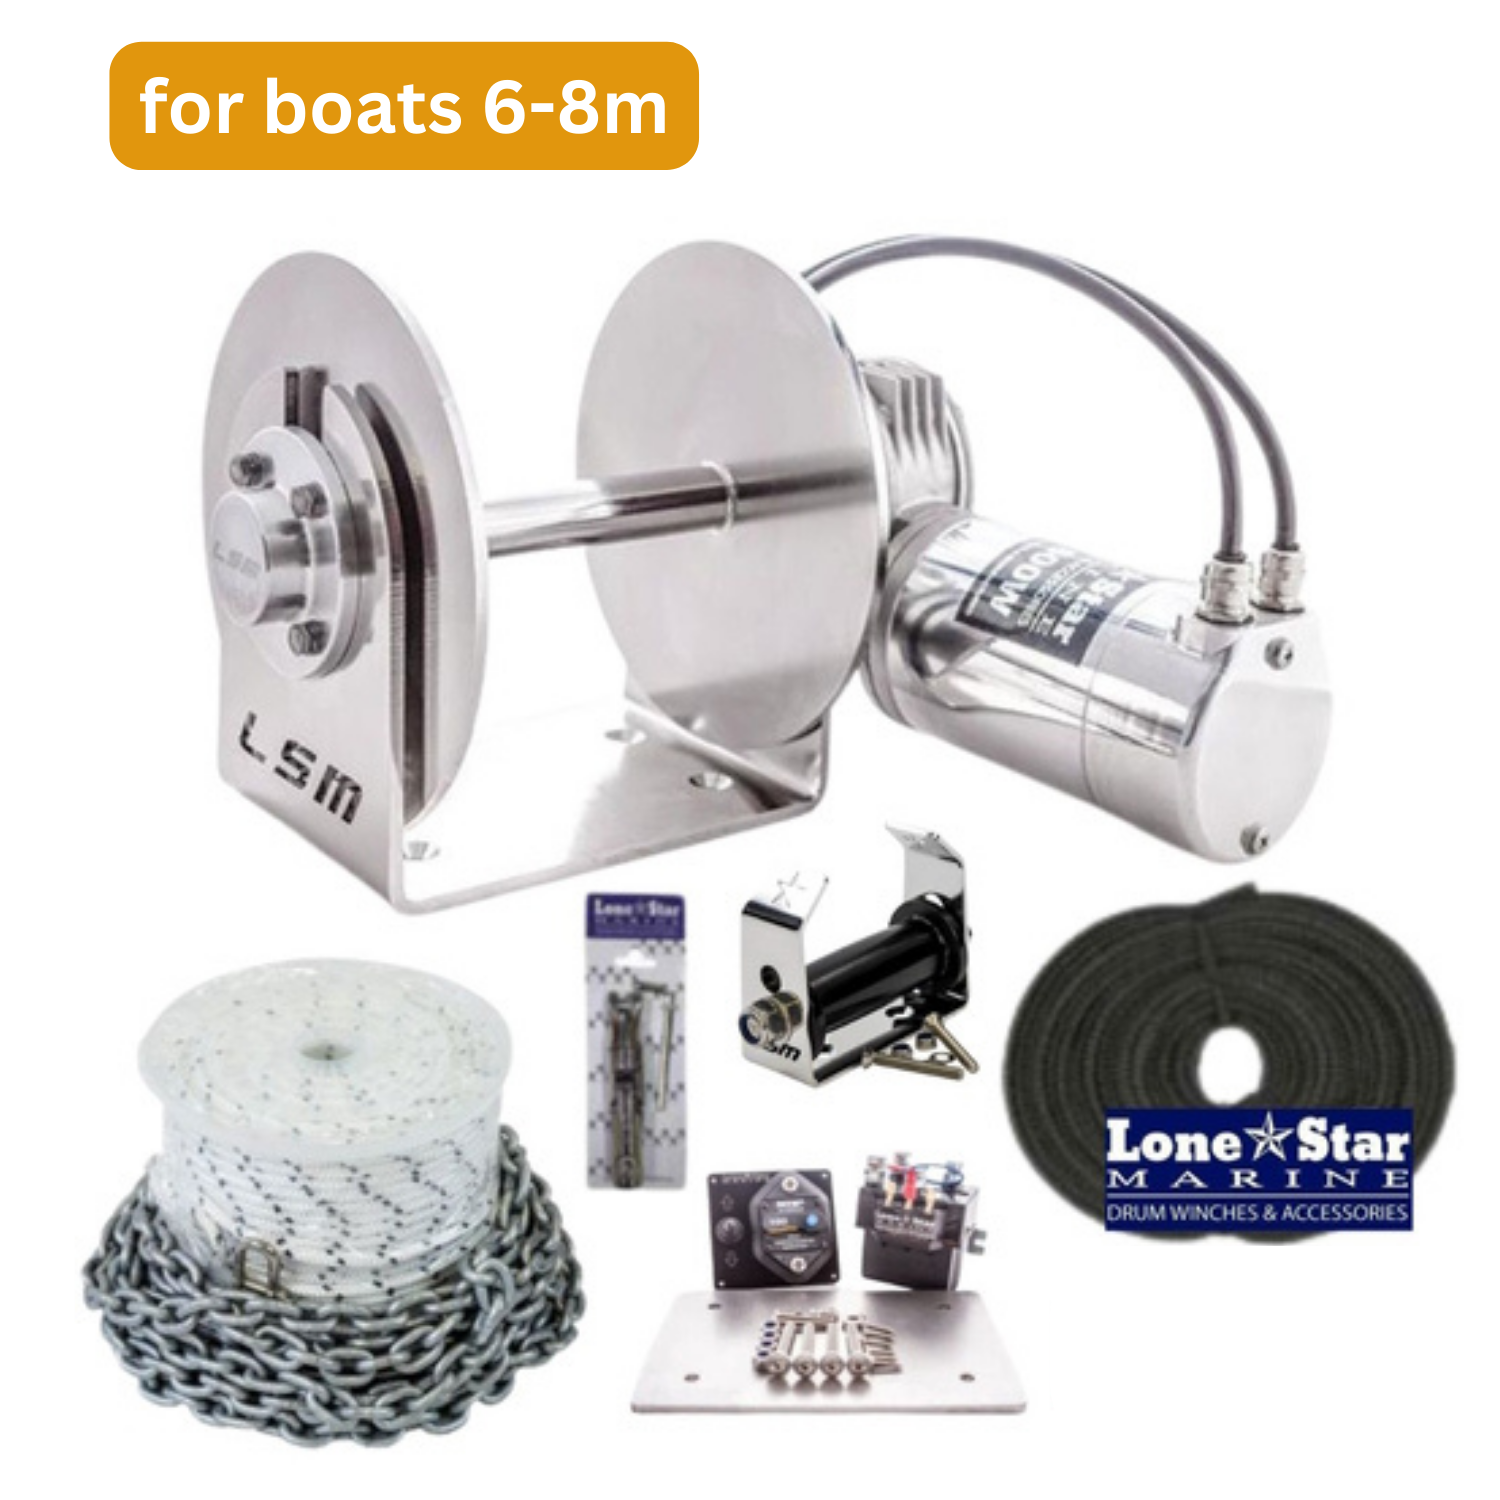 GX2 Anchor Winches for Boats 6-8m